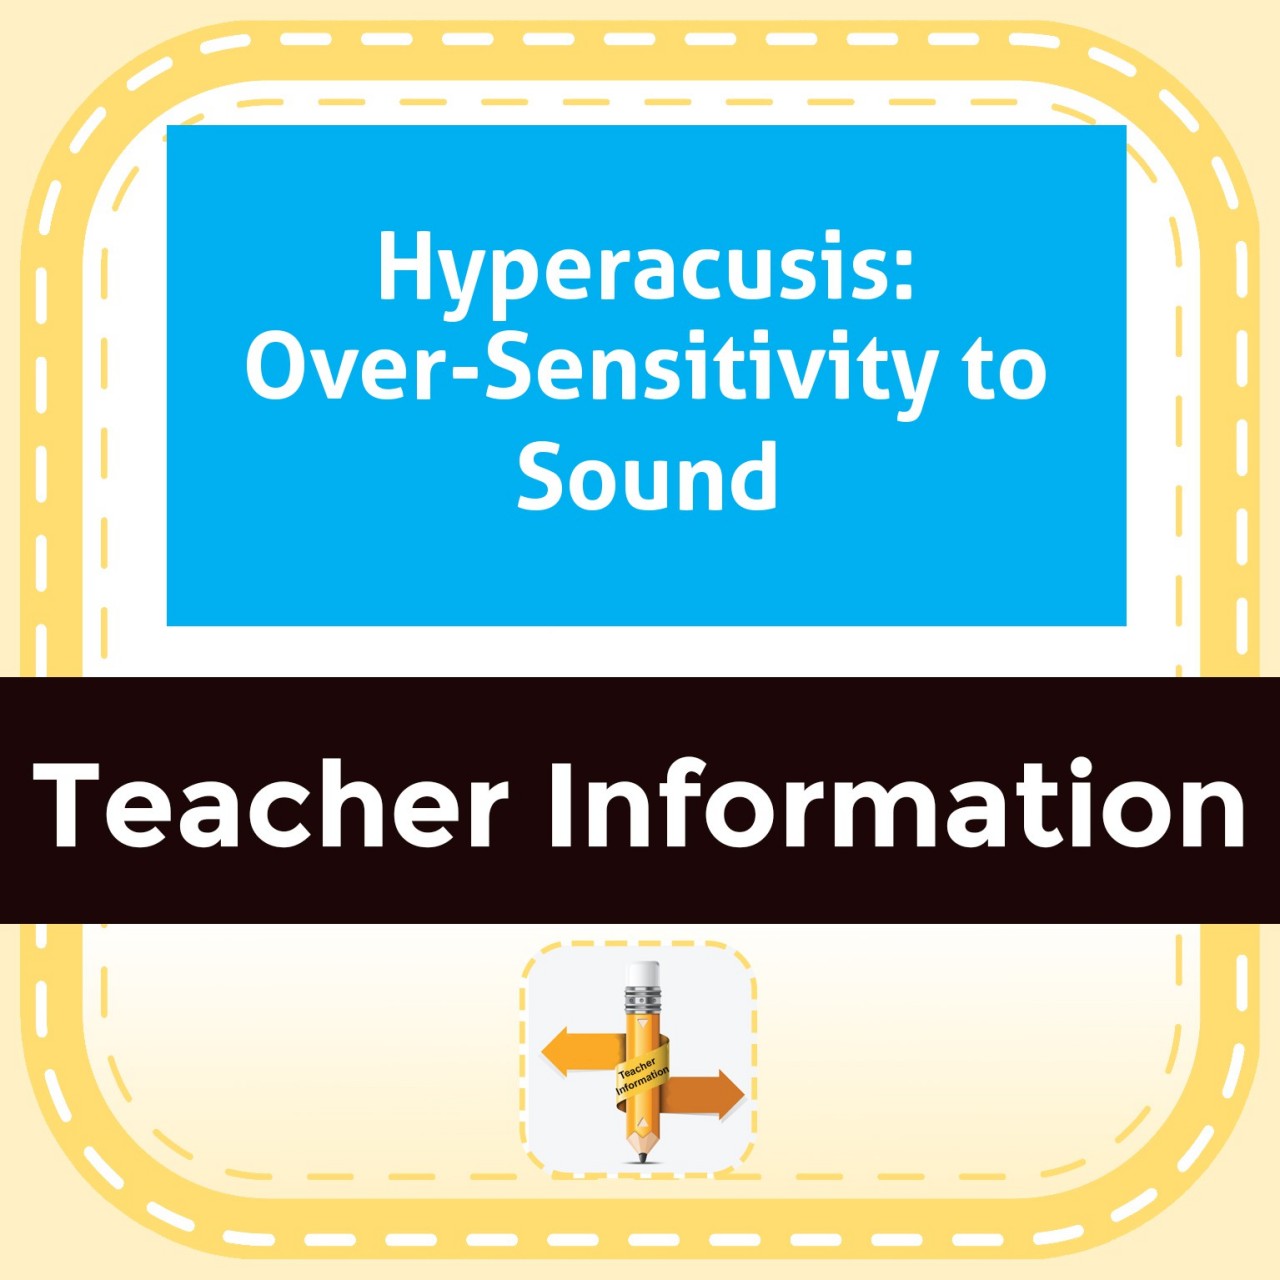 Hyperacusis: Over-Sensitivity to Sound